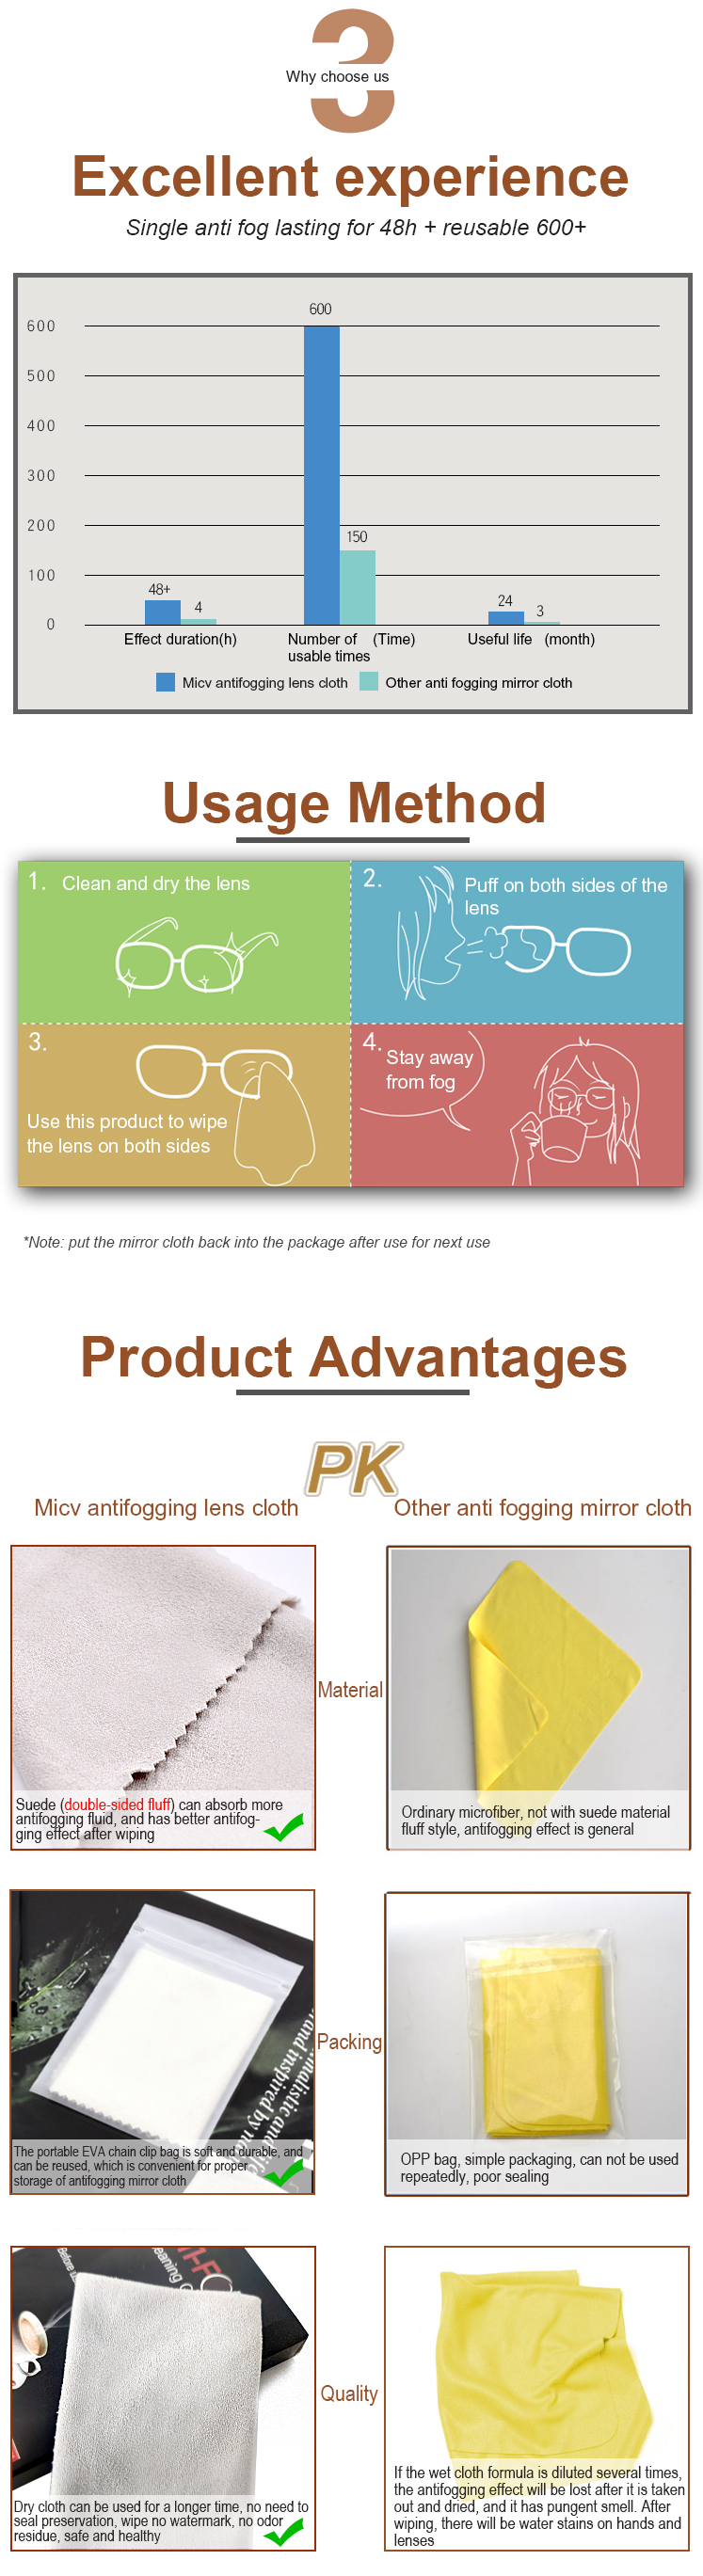 Anti Fog Spectacle Cleaning Cloth, Reusable Portable High Quality Suede Lens Wipes for Glasses Cleaning cloth